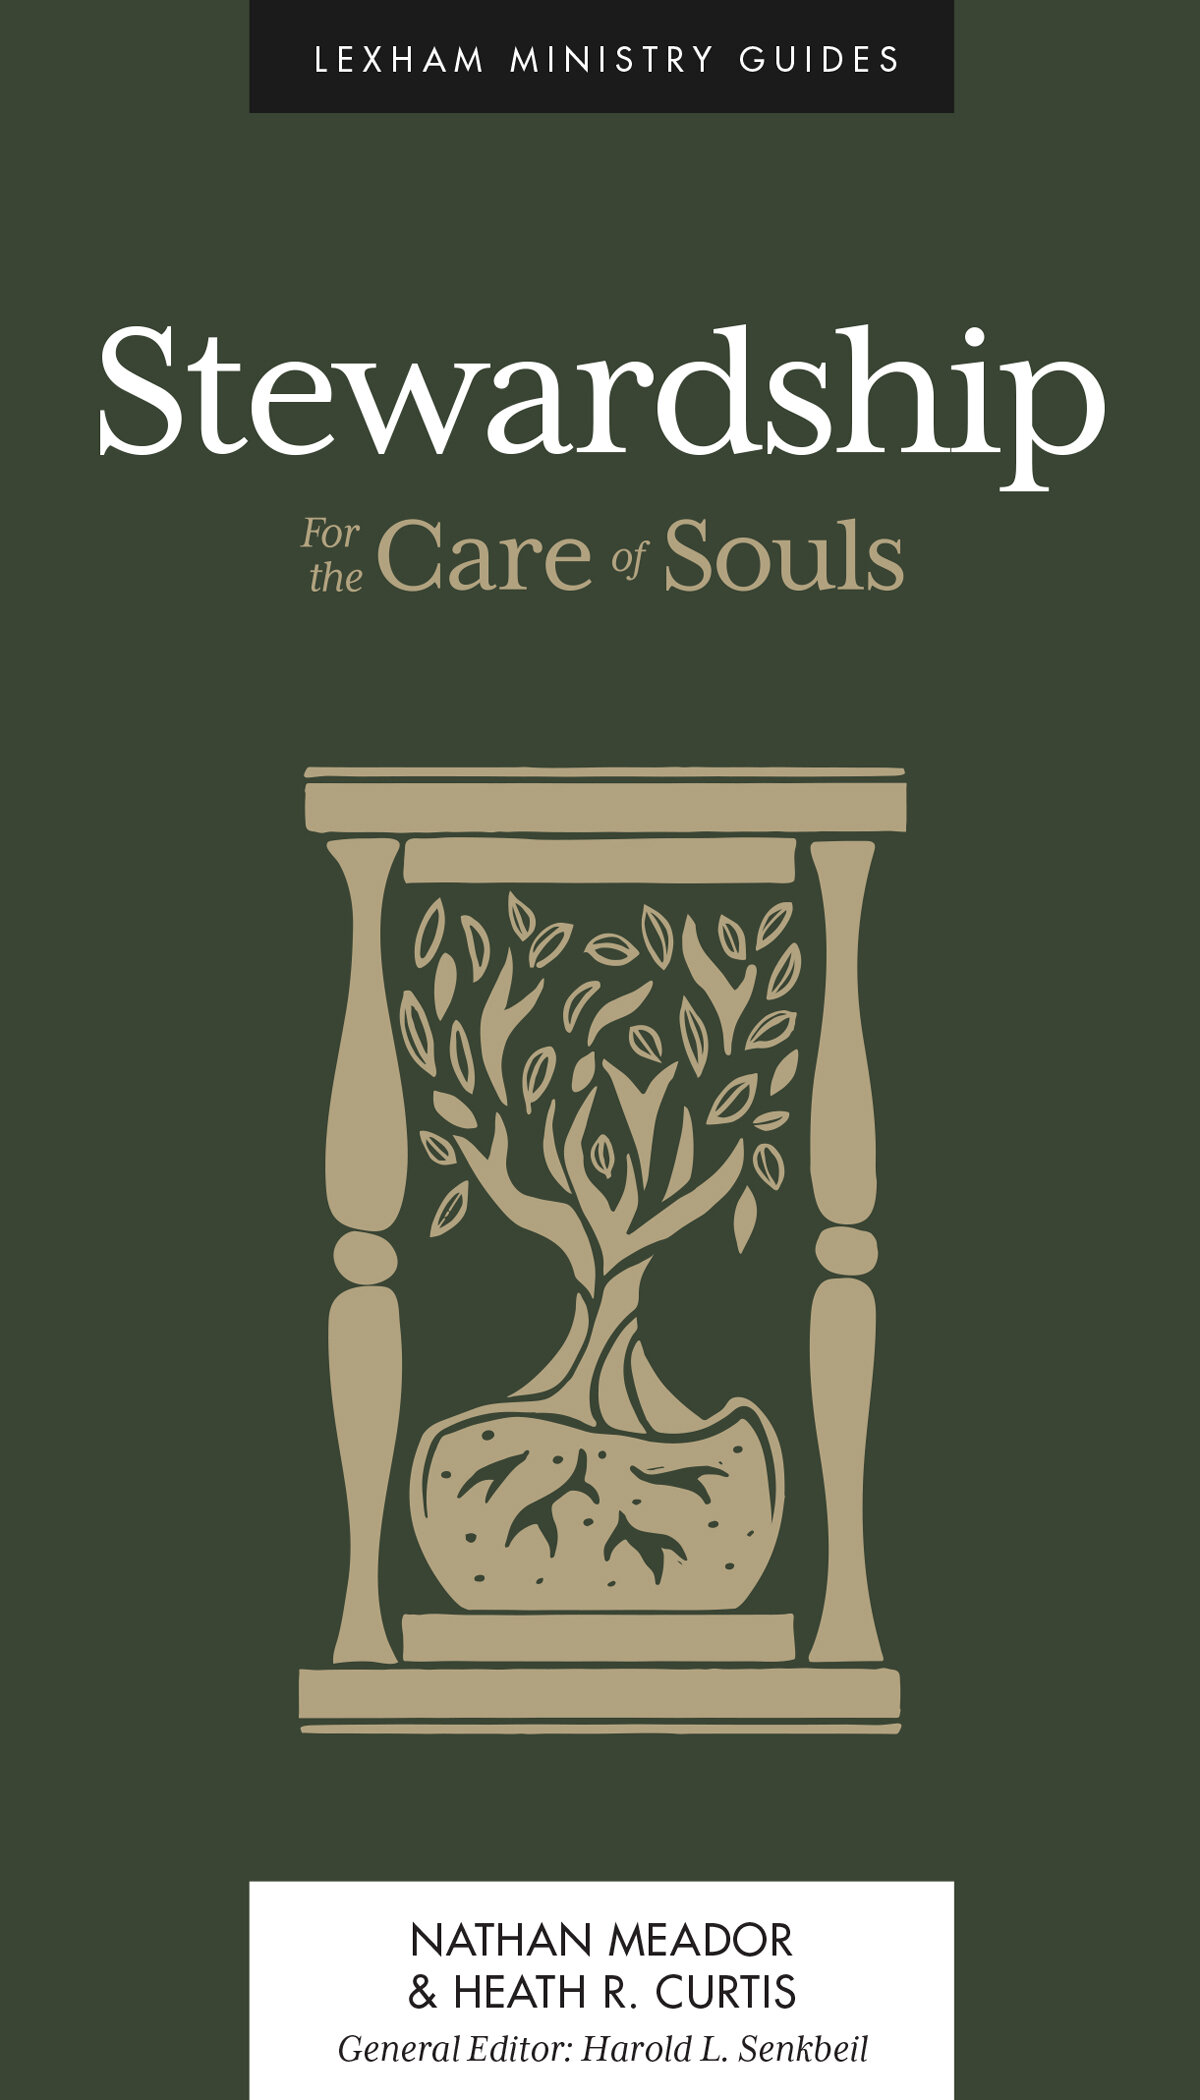 Stewardship: For the Care of Souls (Lexham Ministry Guides)